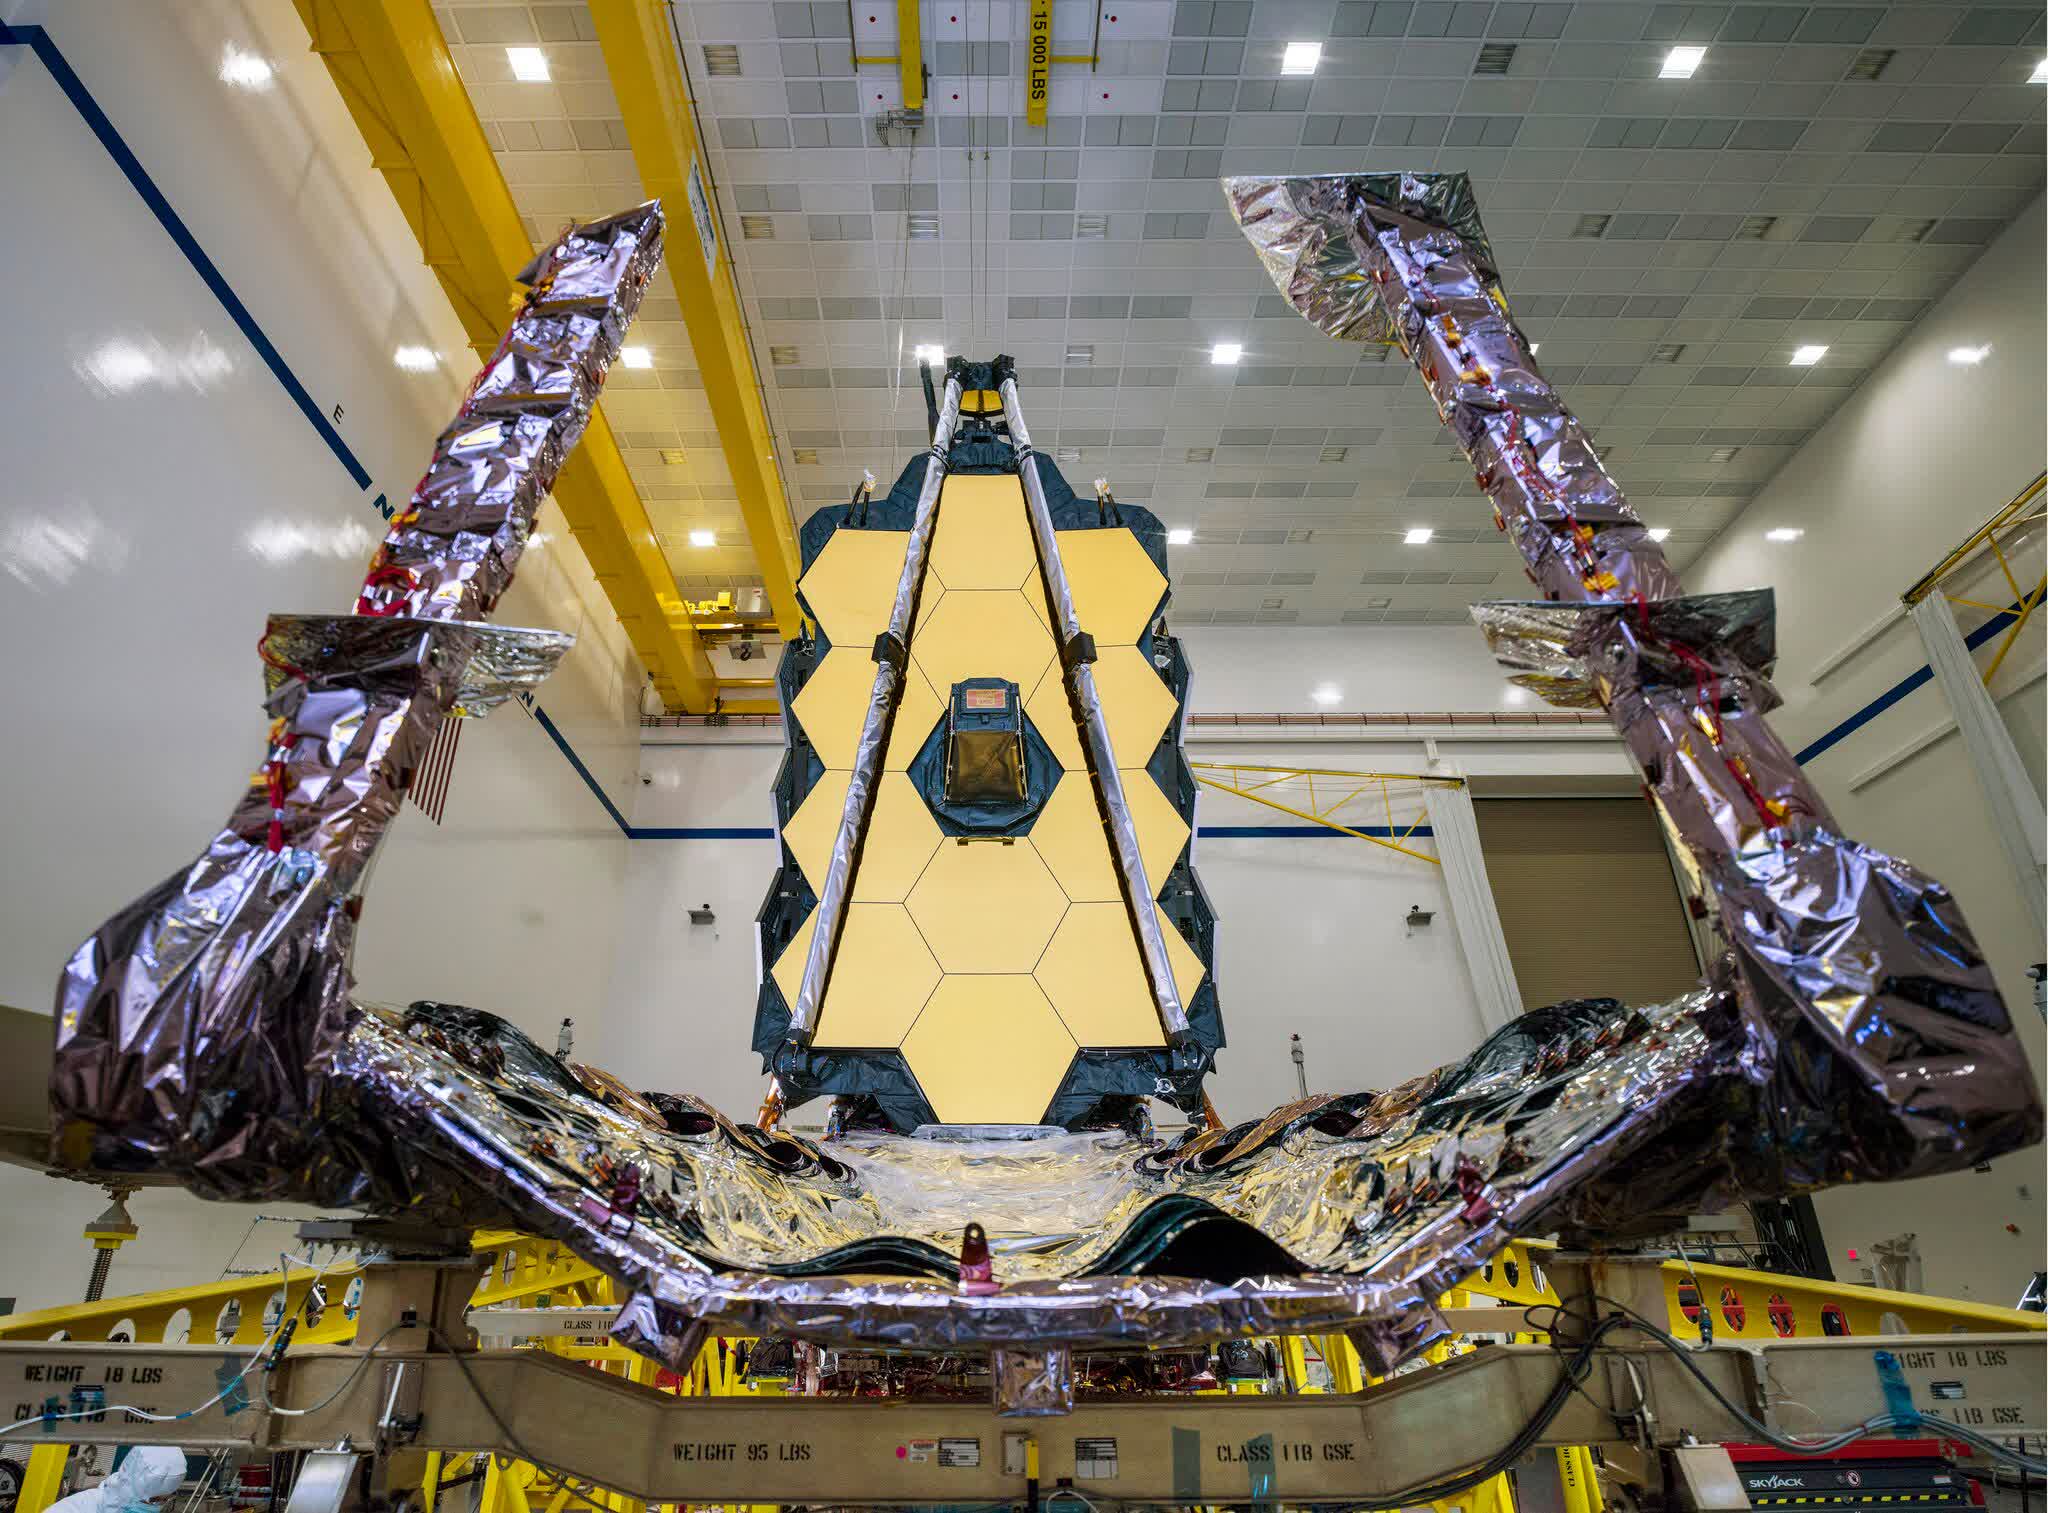 NASA delays James Webb space telescope December 18 launch date over an 'incident' during launch prep phase